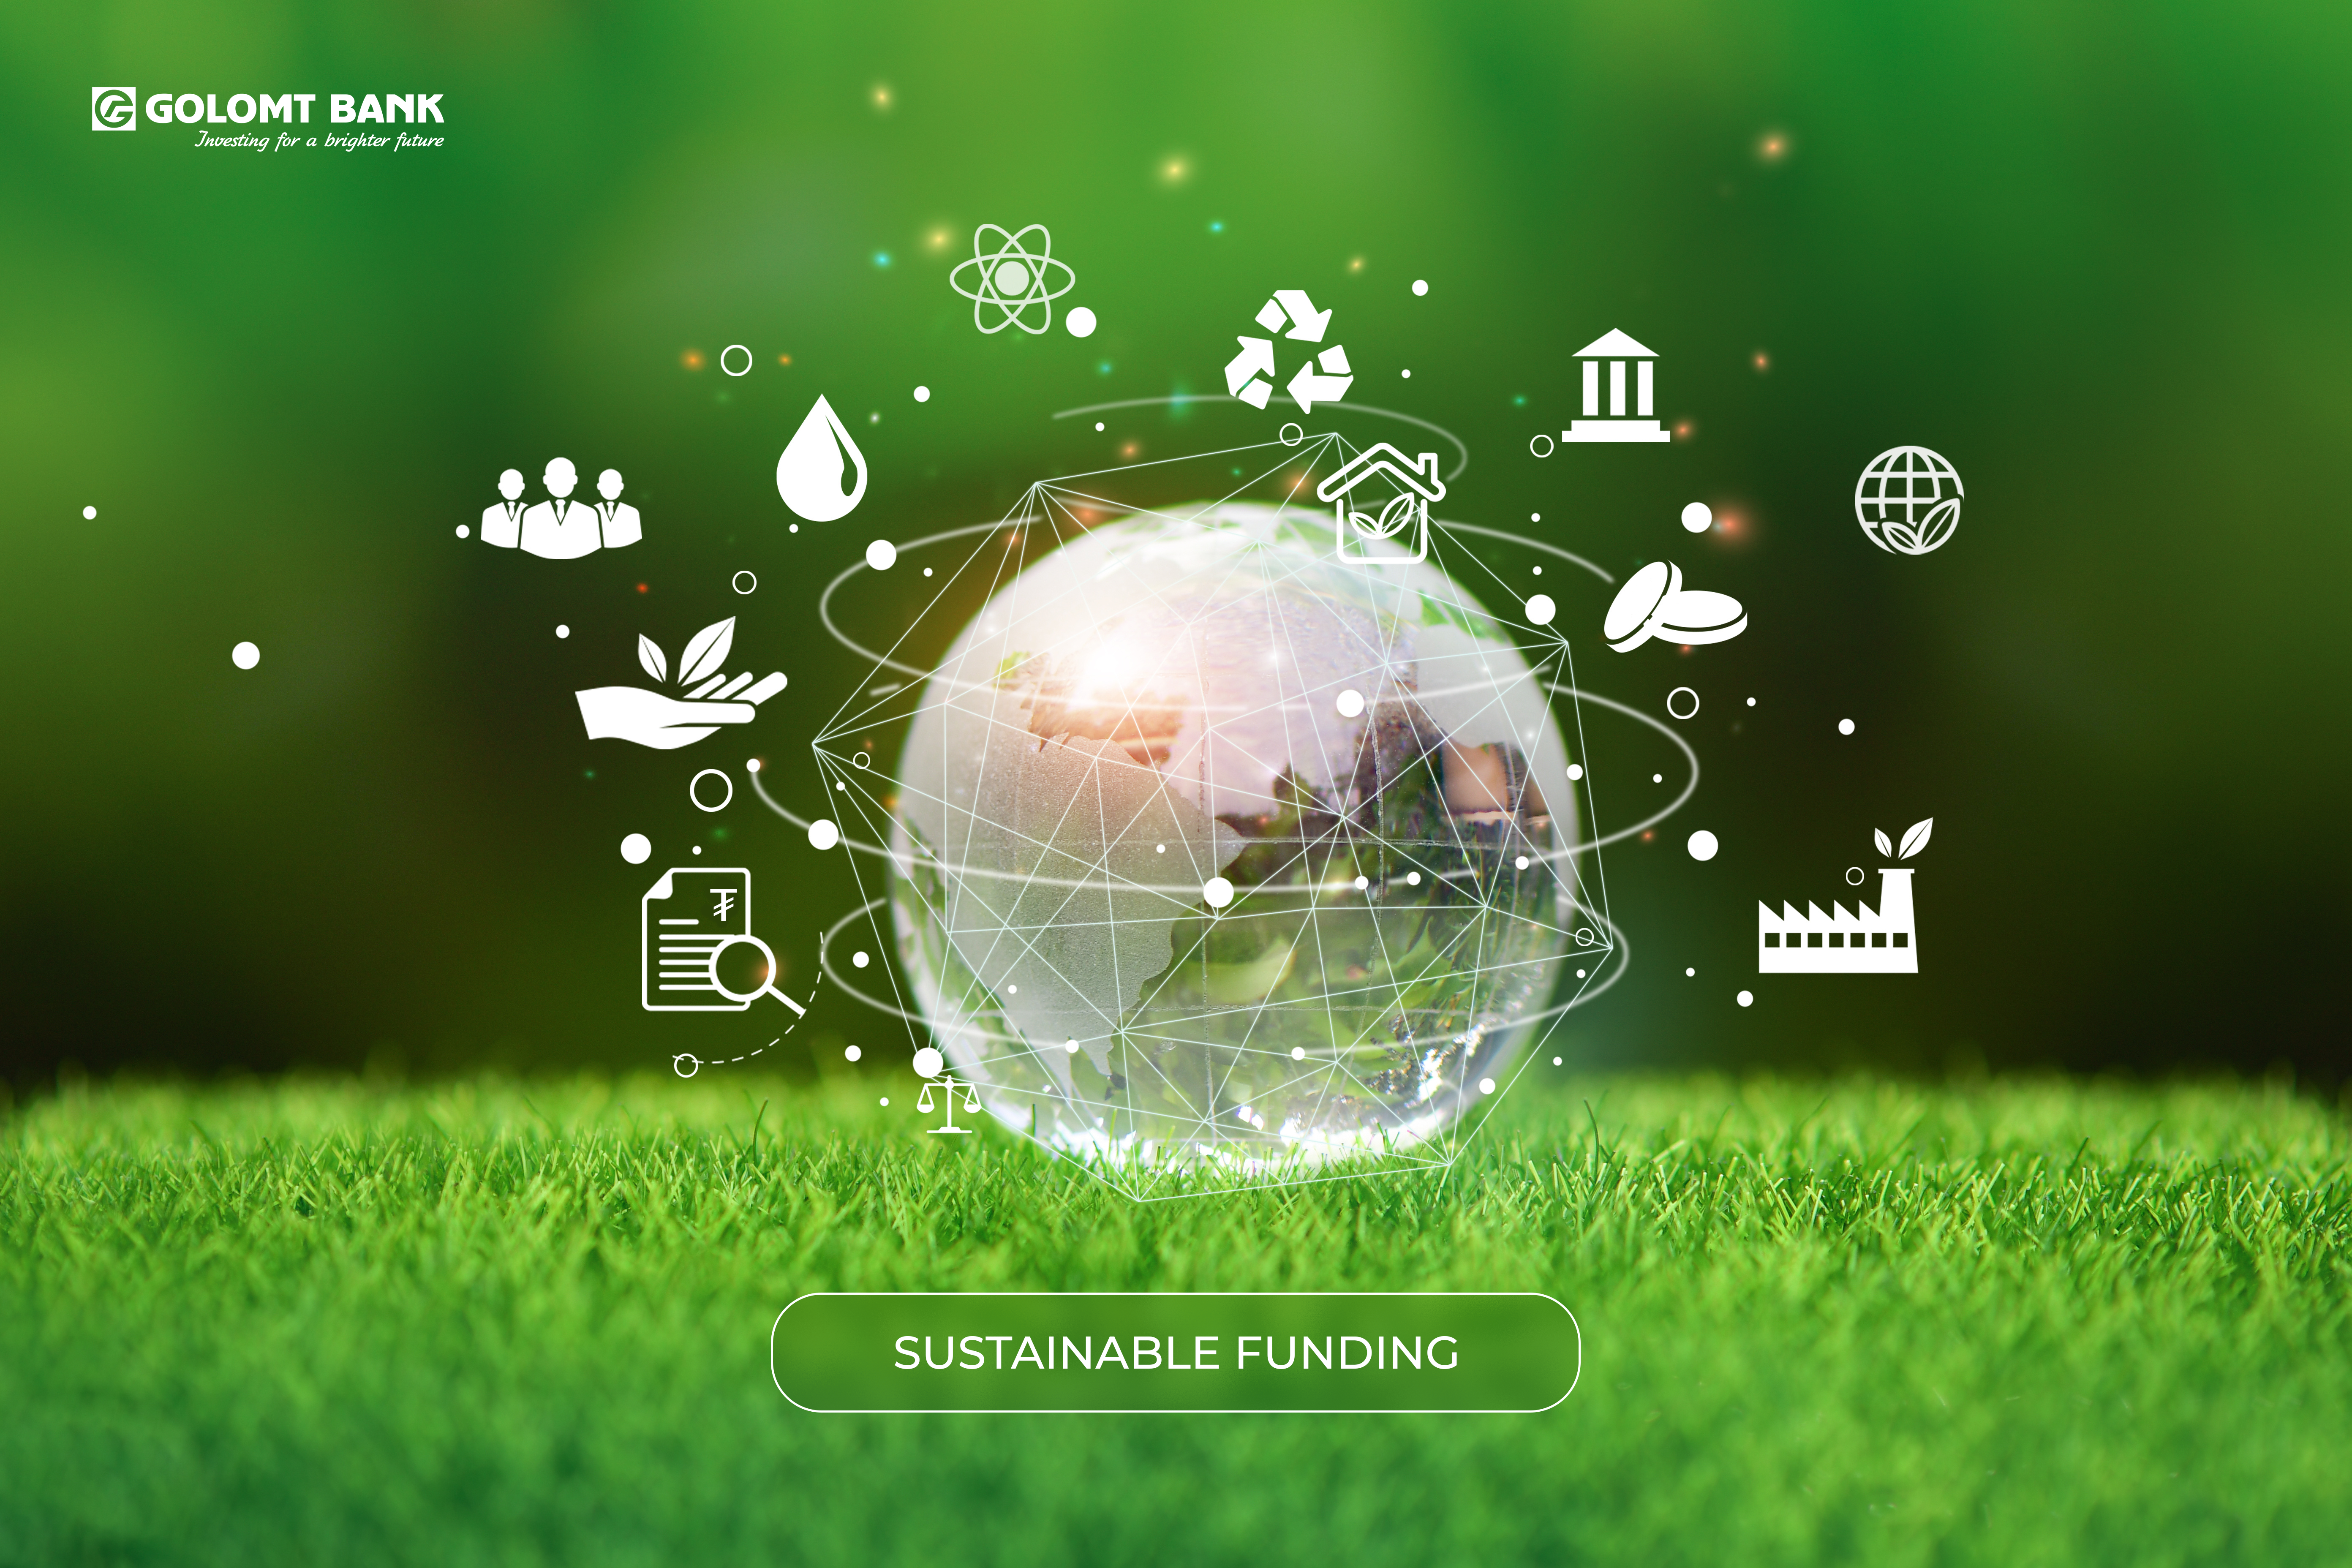 Sustainable funding / Green loan